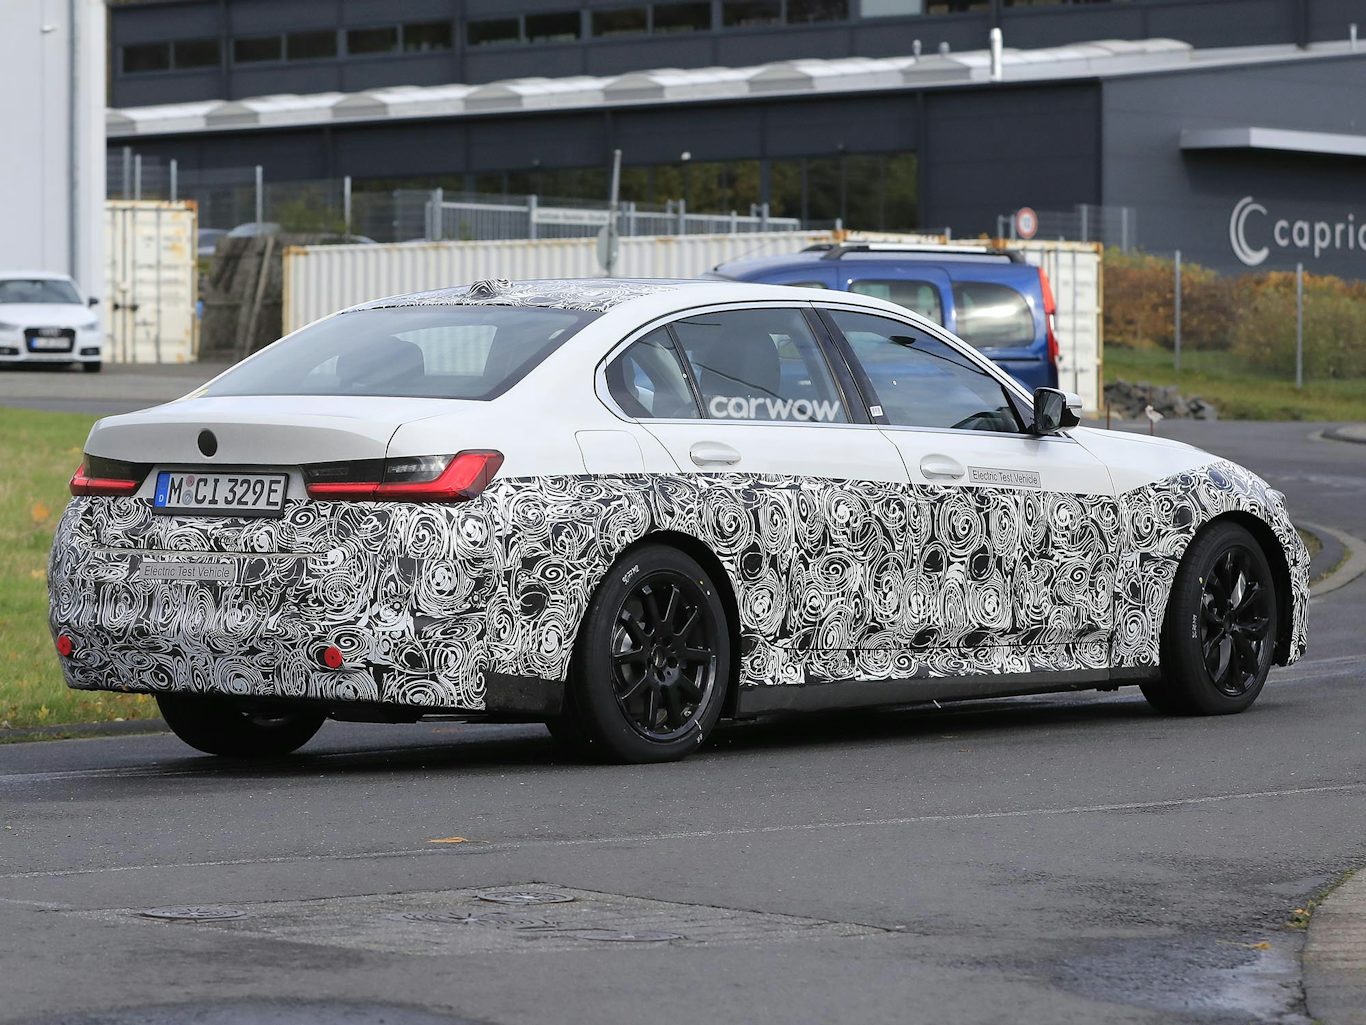 Electric BMW 3 Series (new i3) spotted price, specs and release date